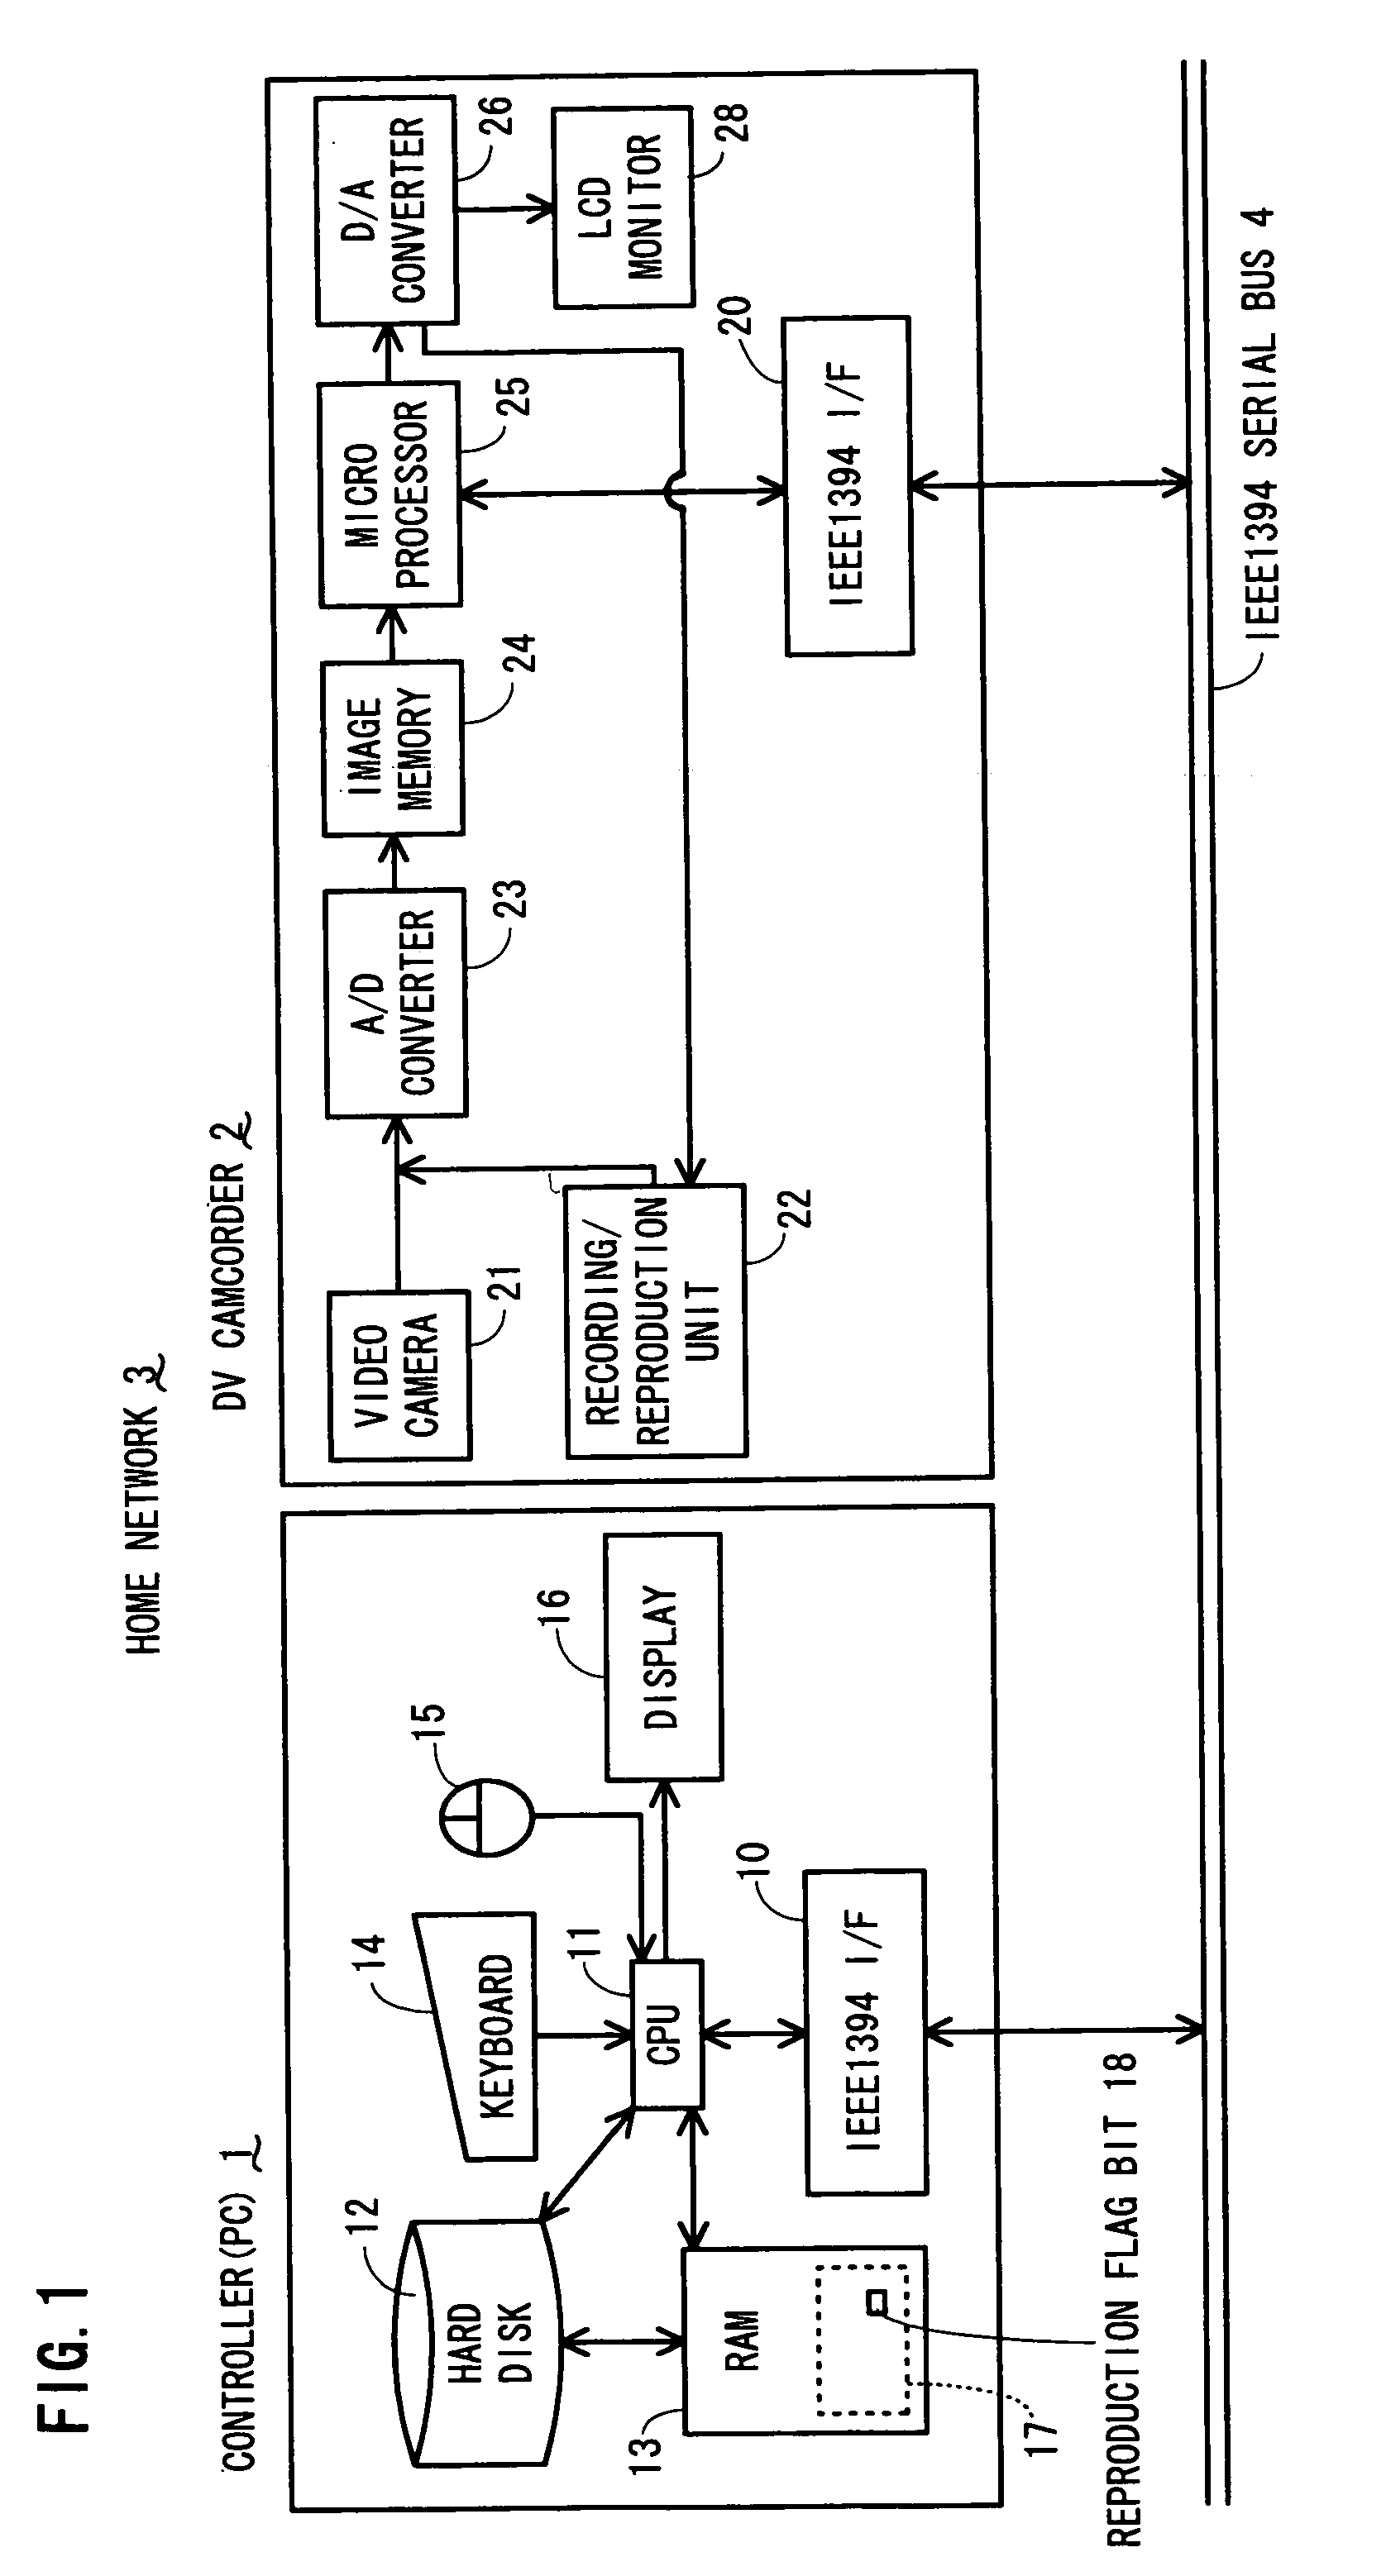 Controlling device connected to IEEE1394 serial bus